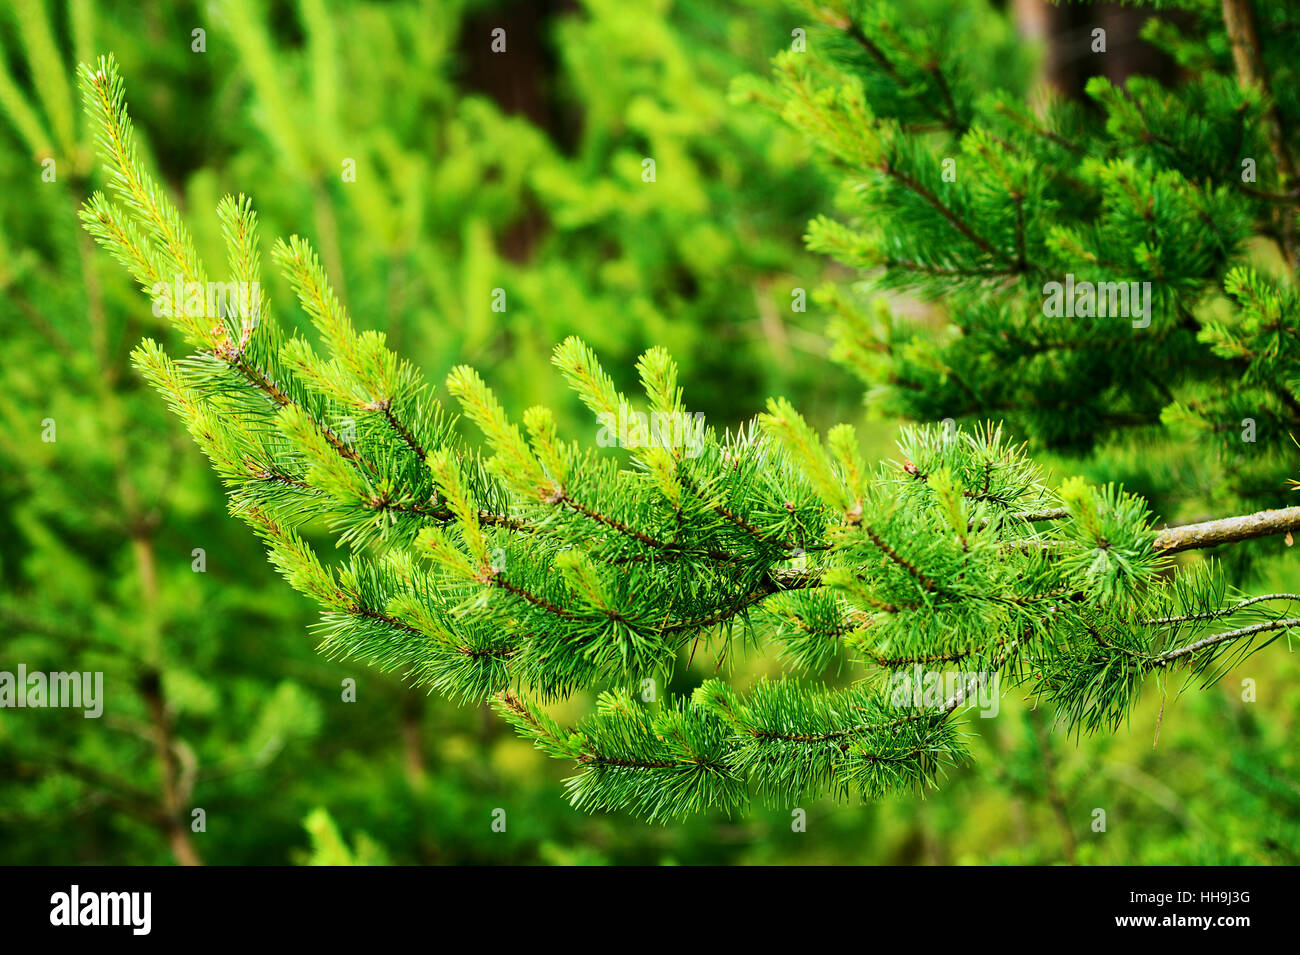 New growth on Scots or Scotch pine tree branch (Pinus sylvestris). Young evergreen coniferous plant sprouts. Pomerania, Poland. Stock Photo